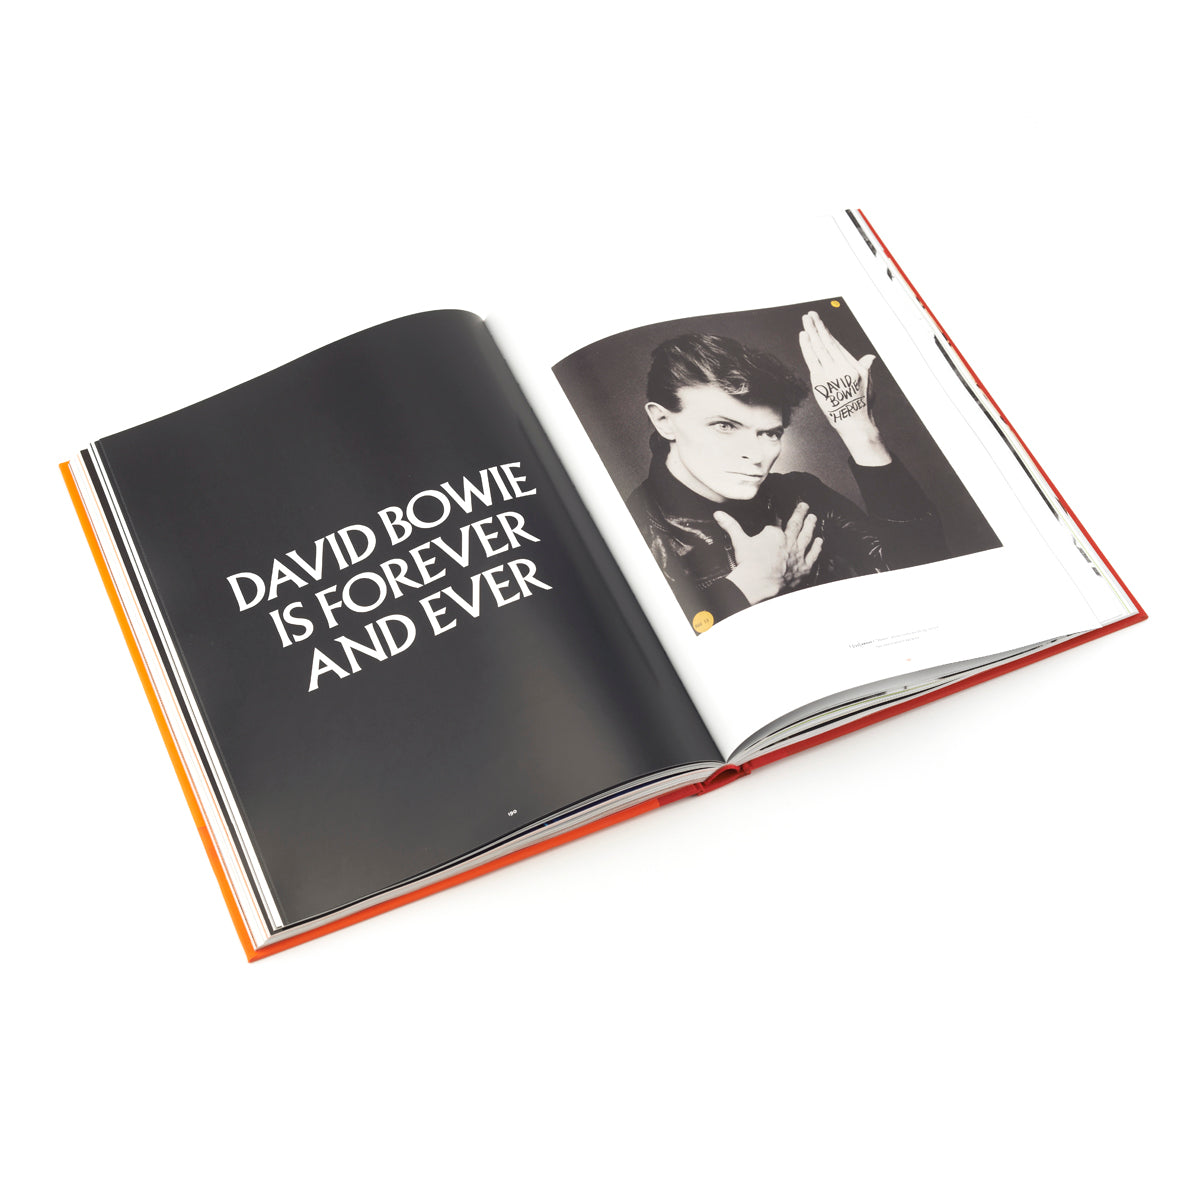 Open book, white text on black page reads DAVID BOWIE IS FOREVER AND EVER. Opposite page shows black and white image of Bowie.